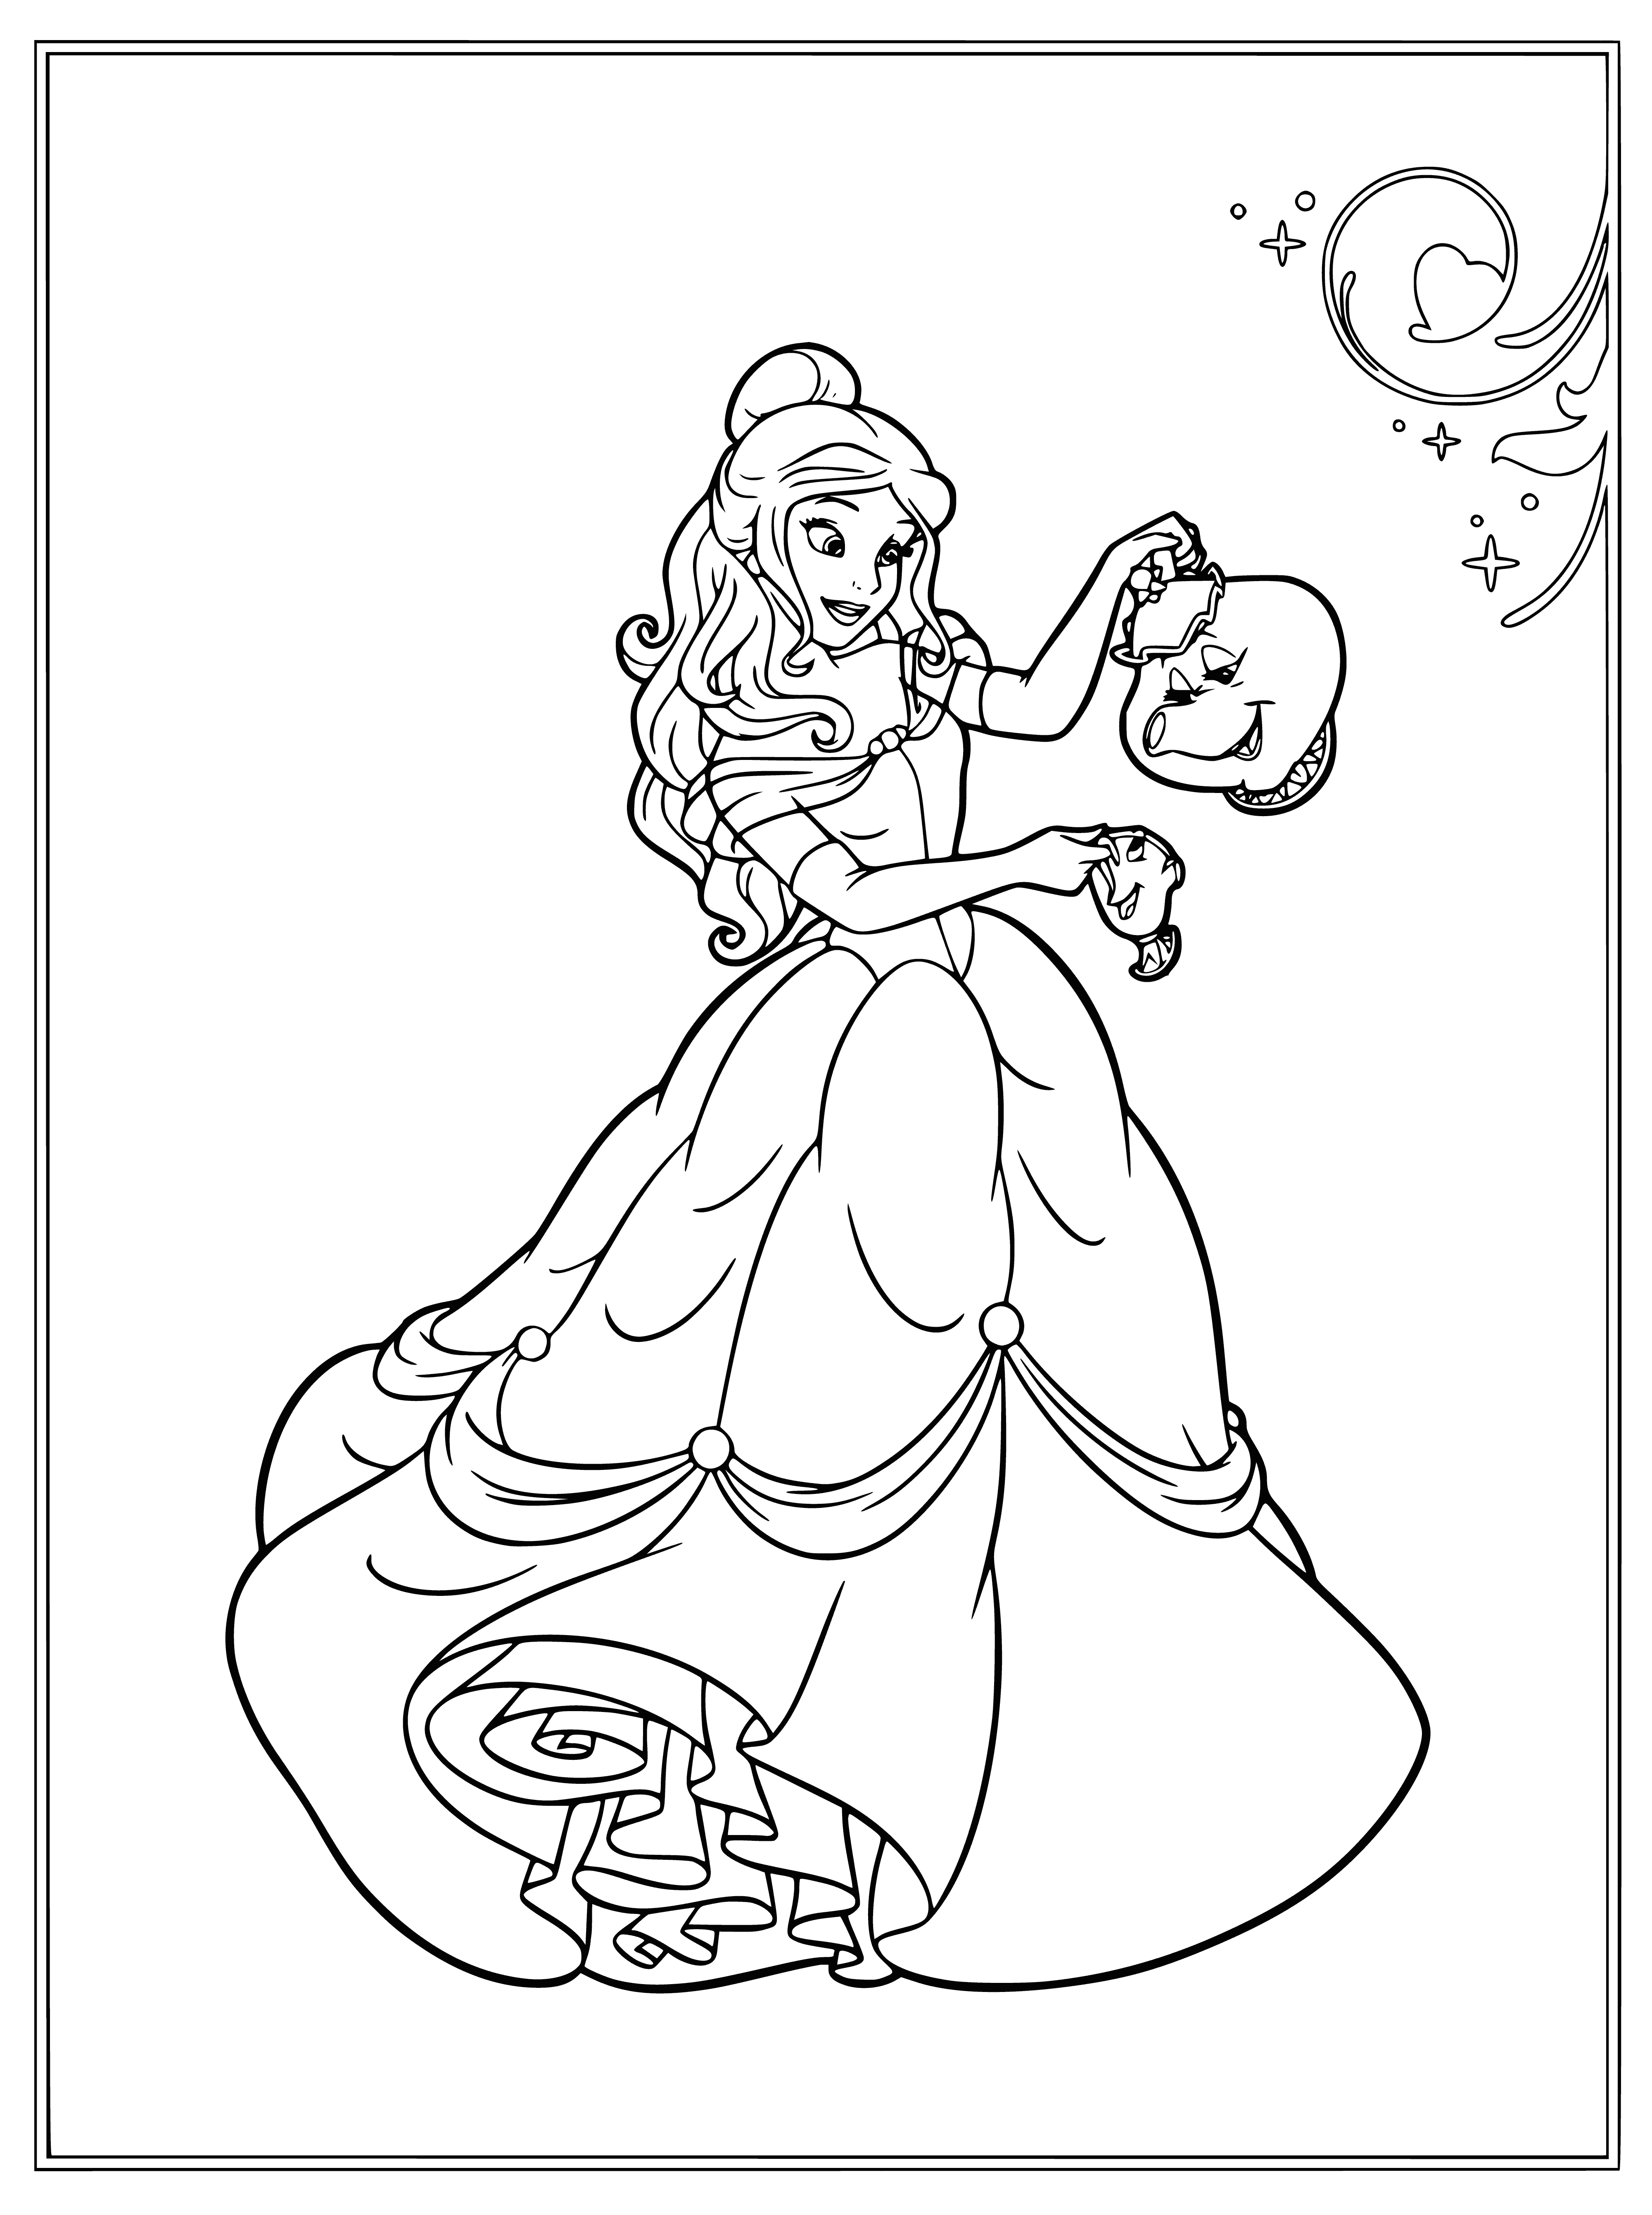 Belle and the Magic Servant coloring page